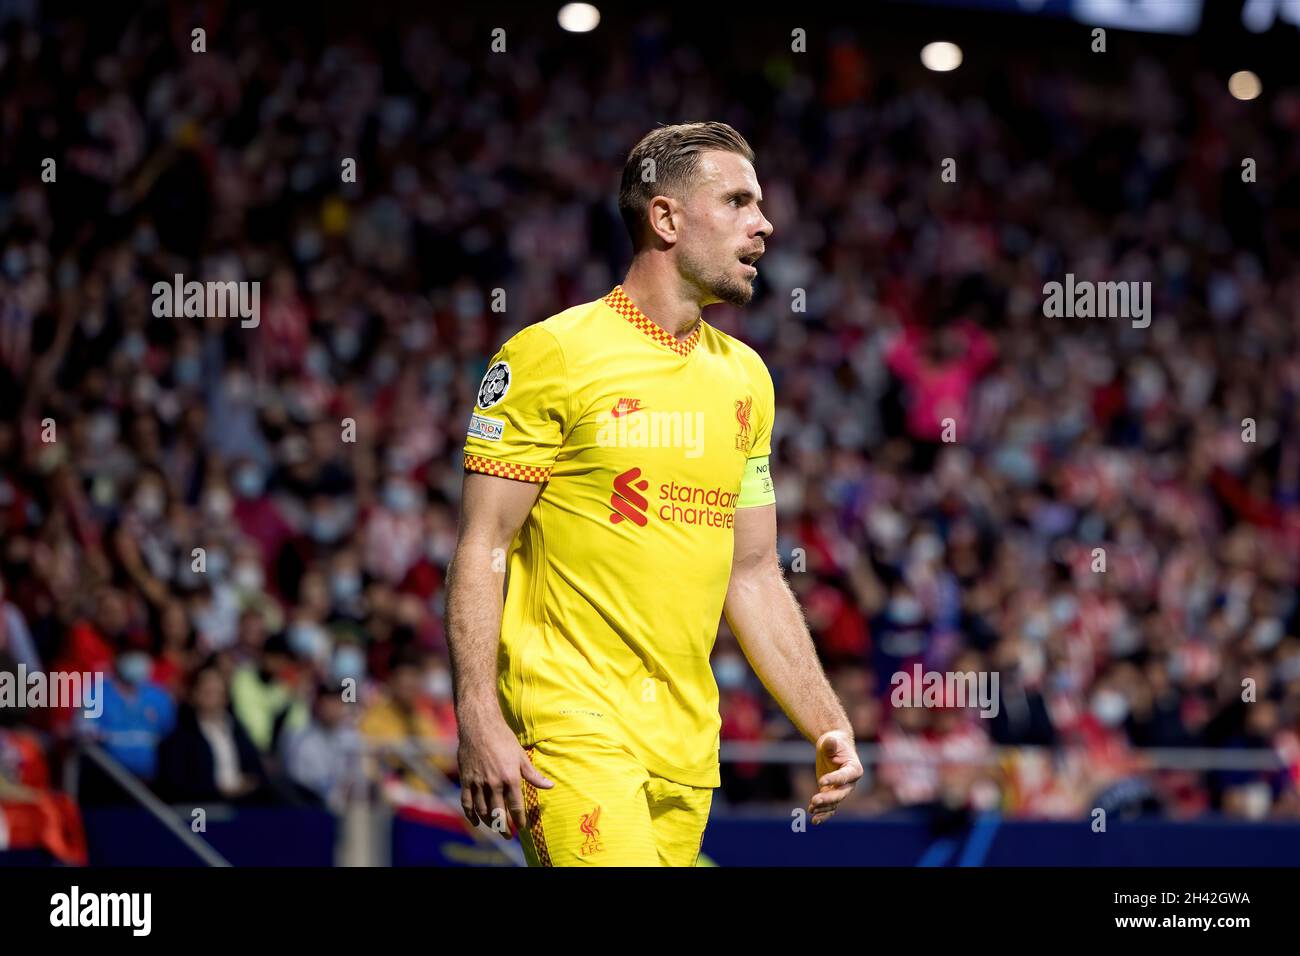 MADRID - OCT 19: Jordan Henderson in action at the Uefa Champions League match between Club Atletico de Madrid and Liverpool FC de Futbol at the Metro Stock Photo